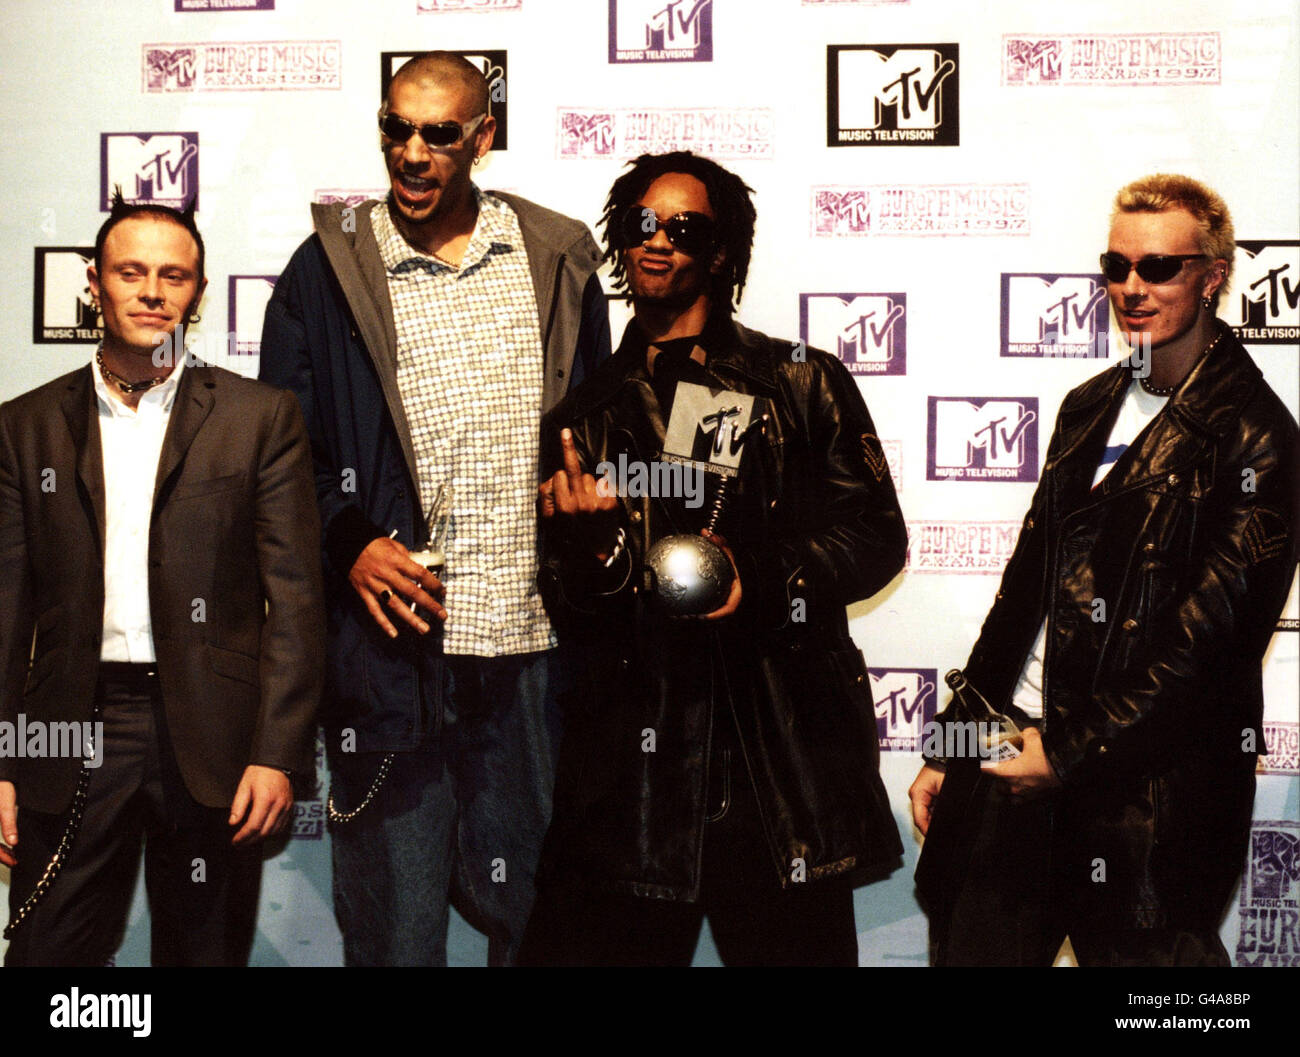 The Prodigy backstage at The MTV Europe Music Awards ceremony held in Rotterdam, Holland. (L-R) Keith Flint, Leeroy Thornhill, Maxim Reality (aka Keith Palmer) and Liam Howlett. Stock Photo